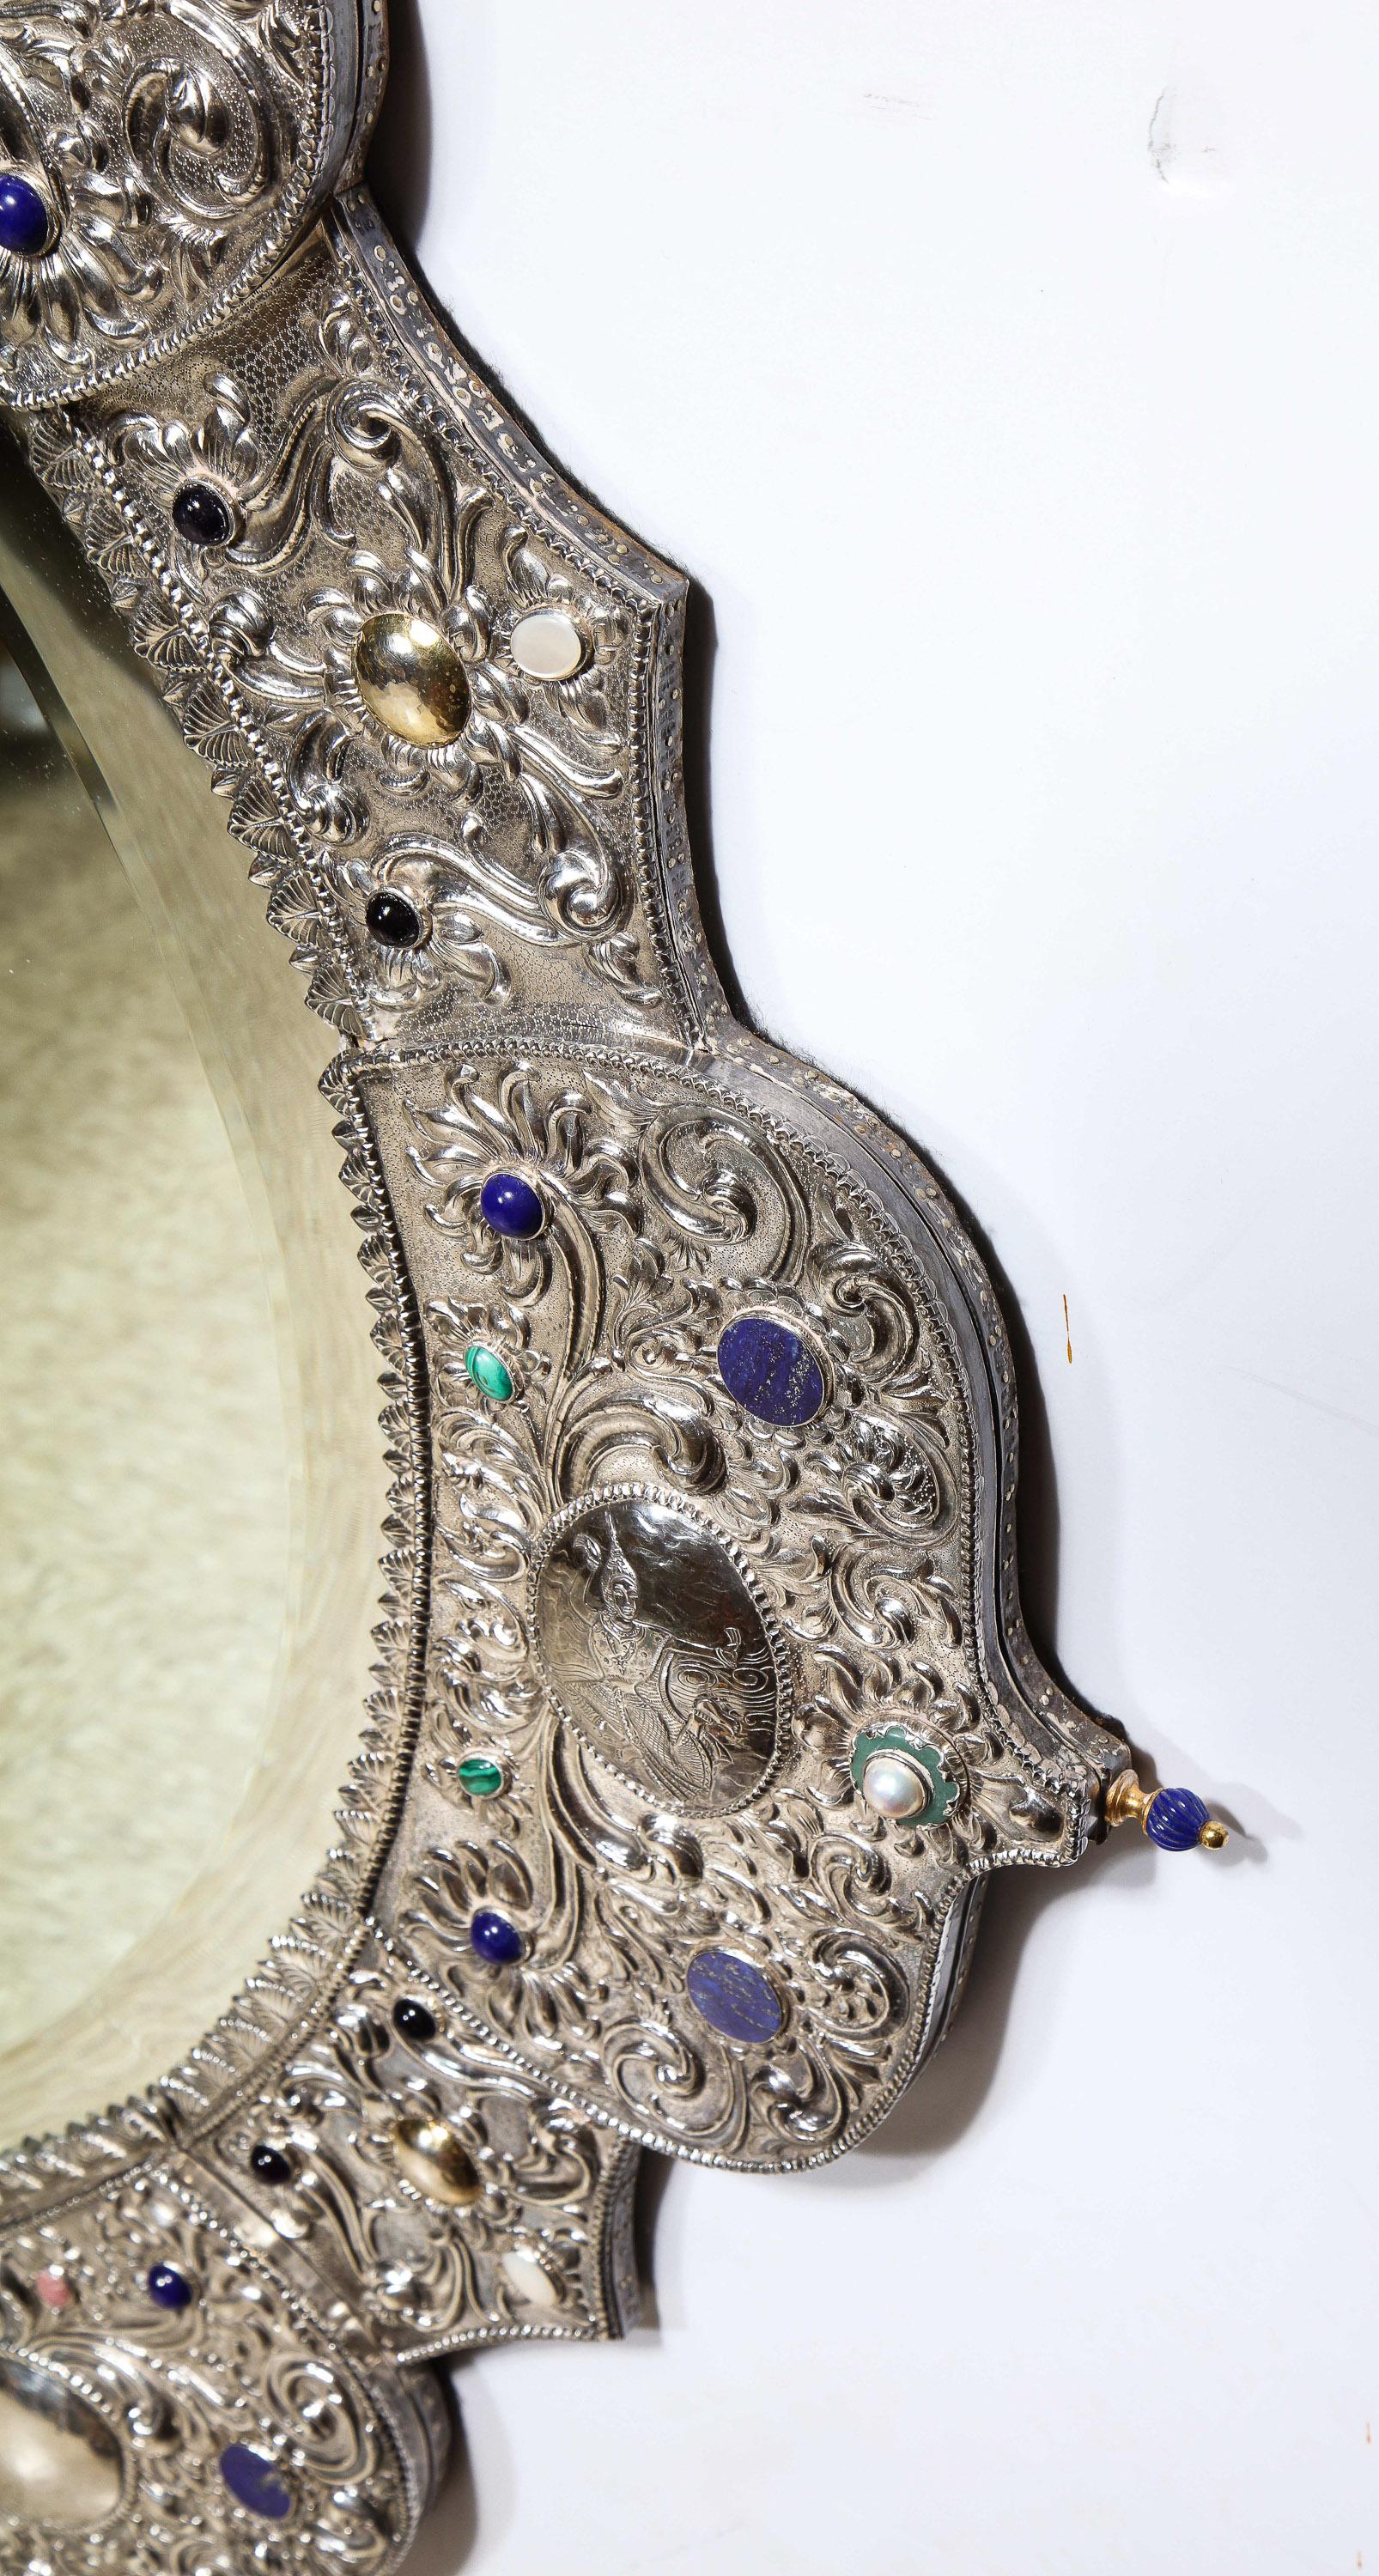 Rare and Magnificent Thai Silver, Gold & Jeweled Palace Mirror for Indian Palace For Sale 8